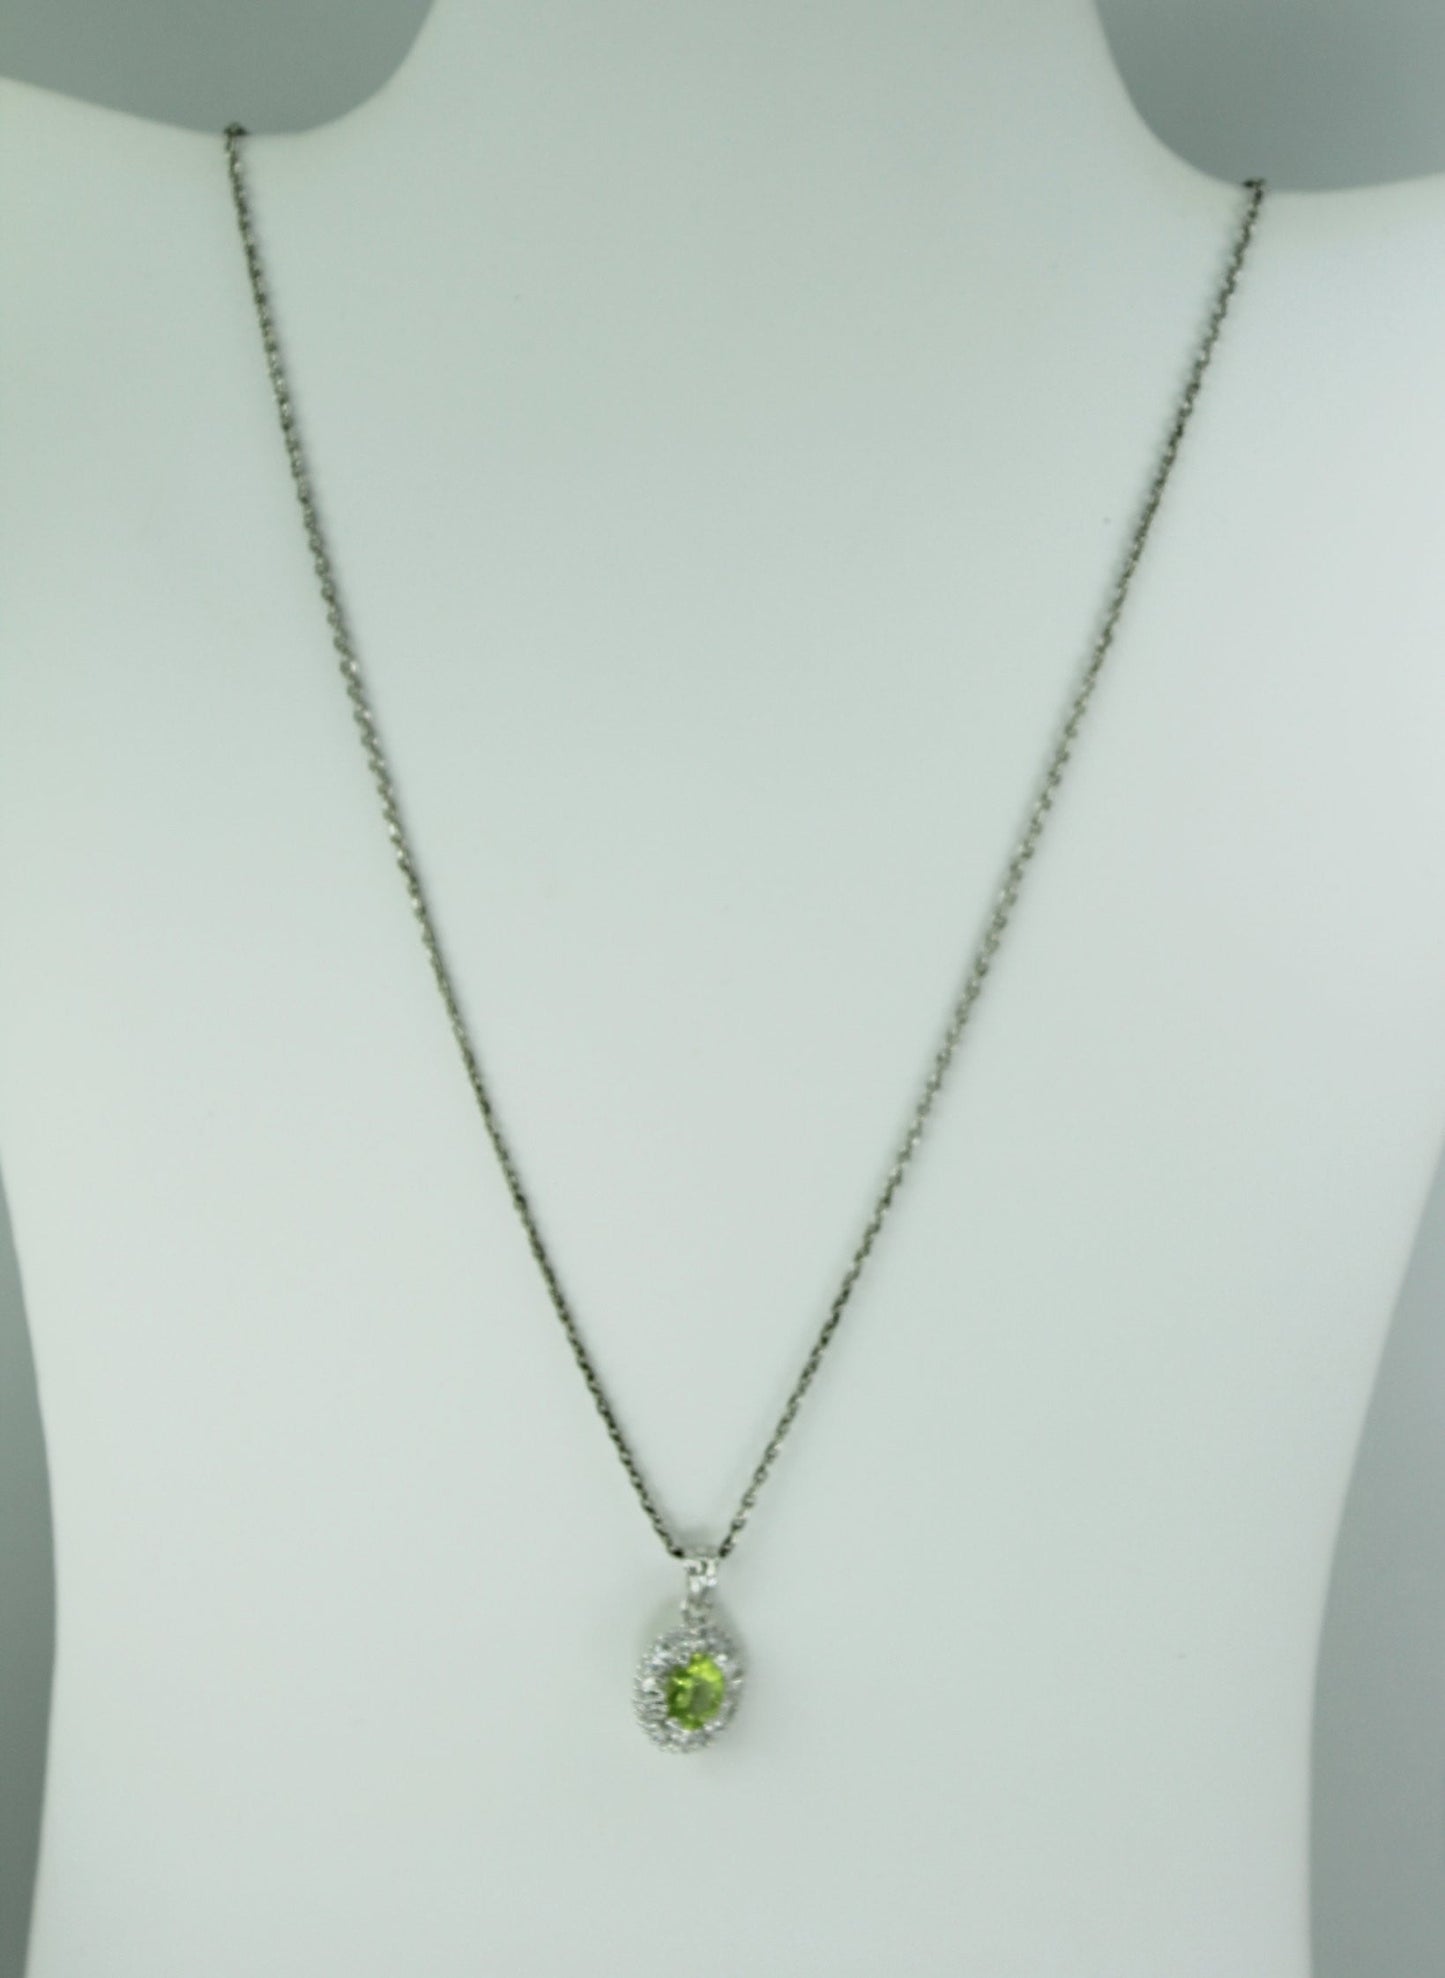 Peridot Sterling Pendant Necklace Silver Chain 925 Lobster closure